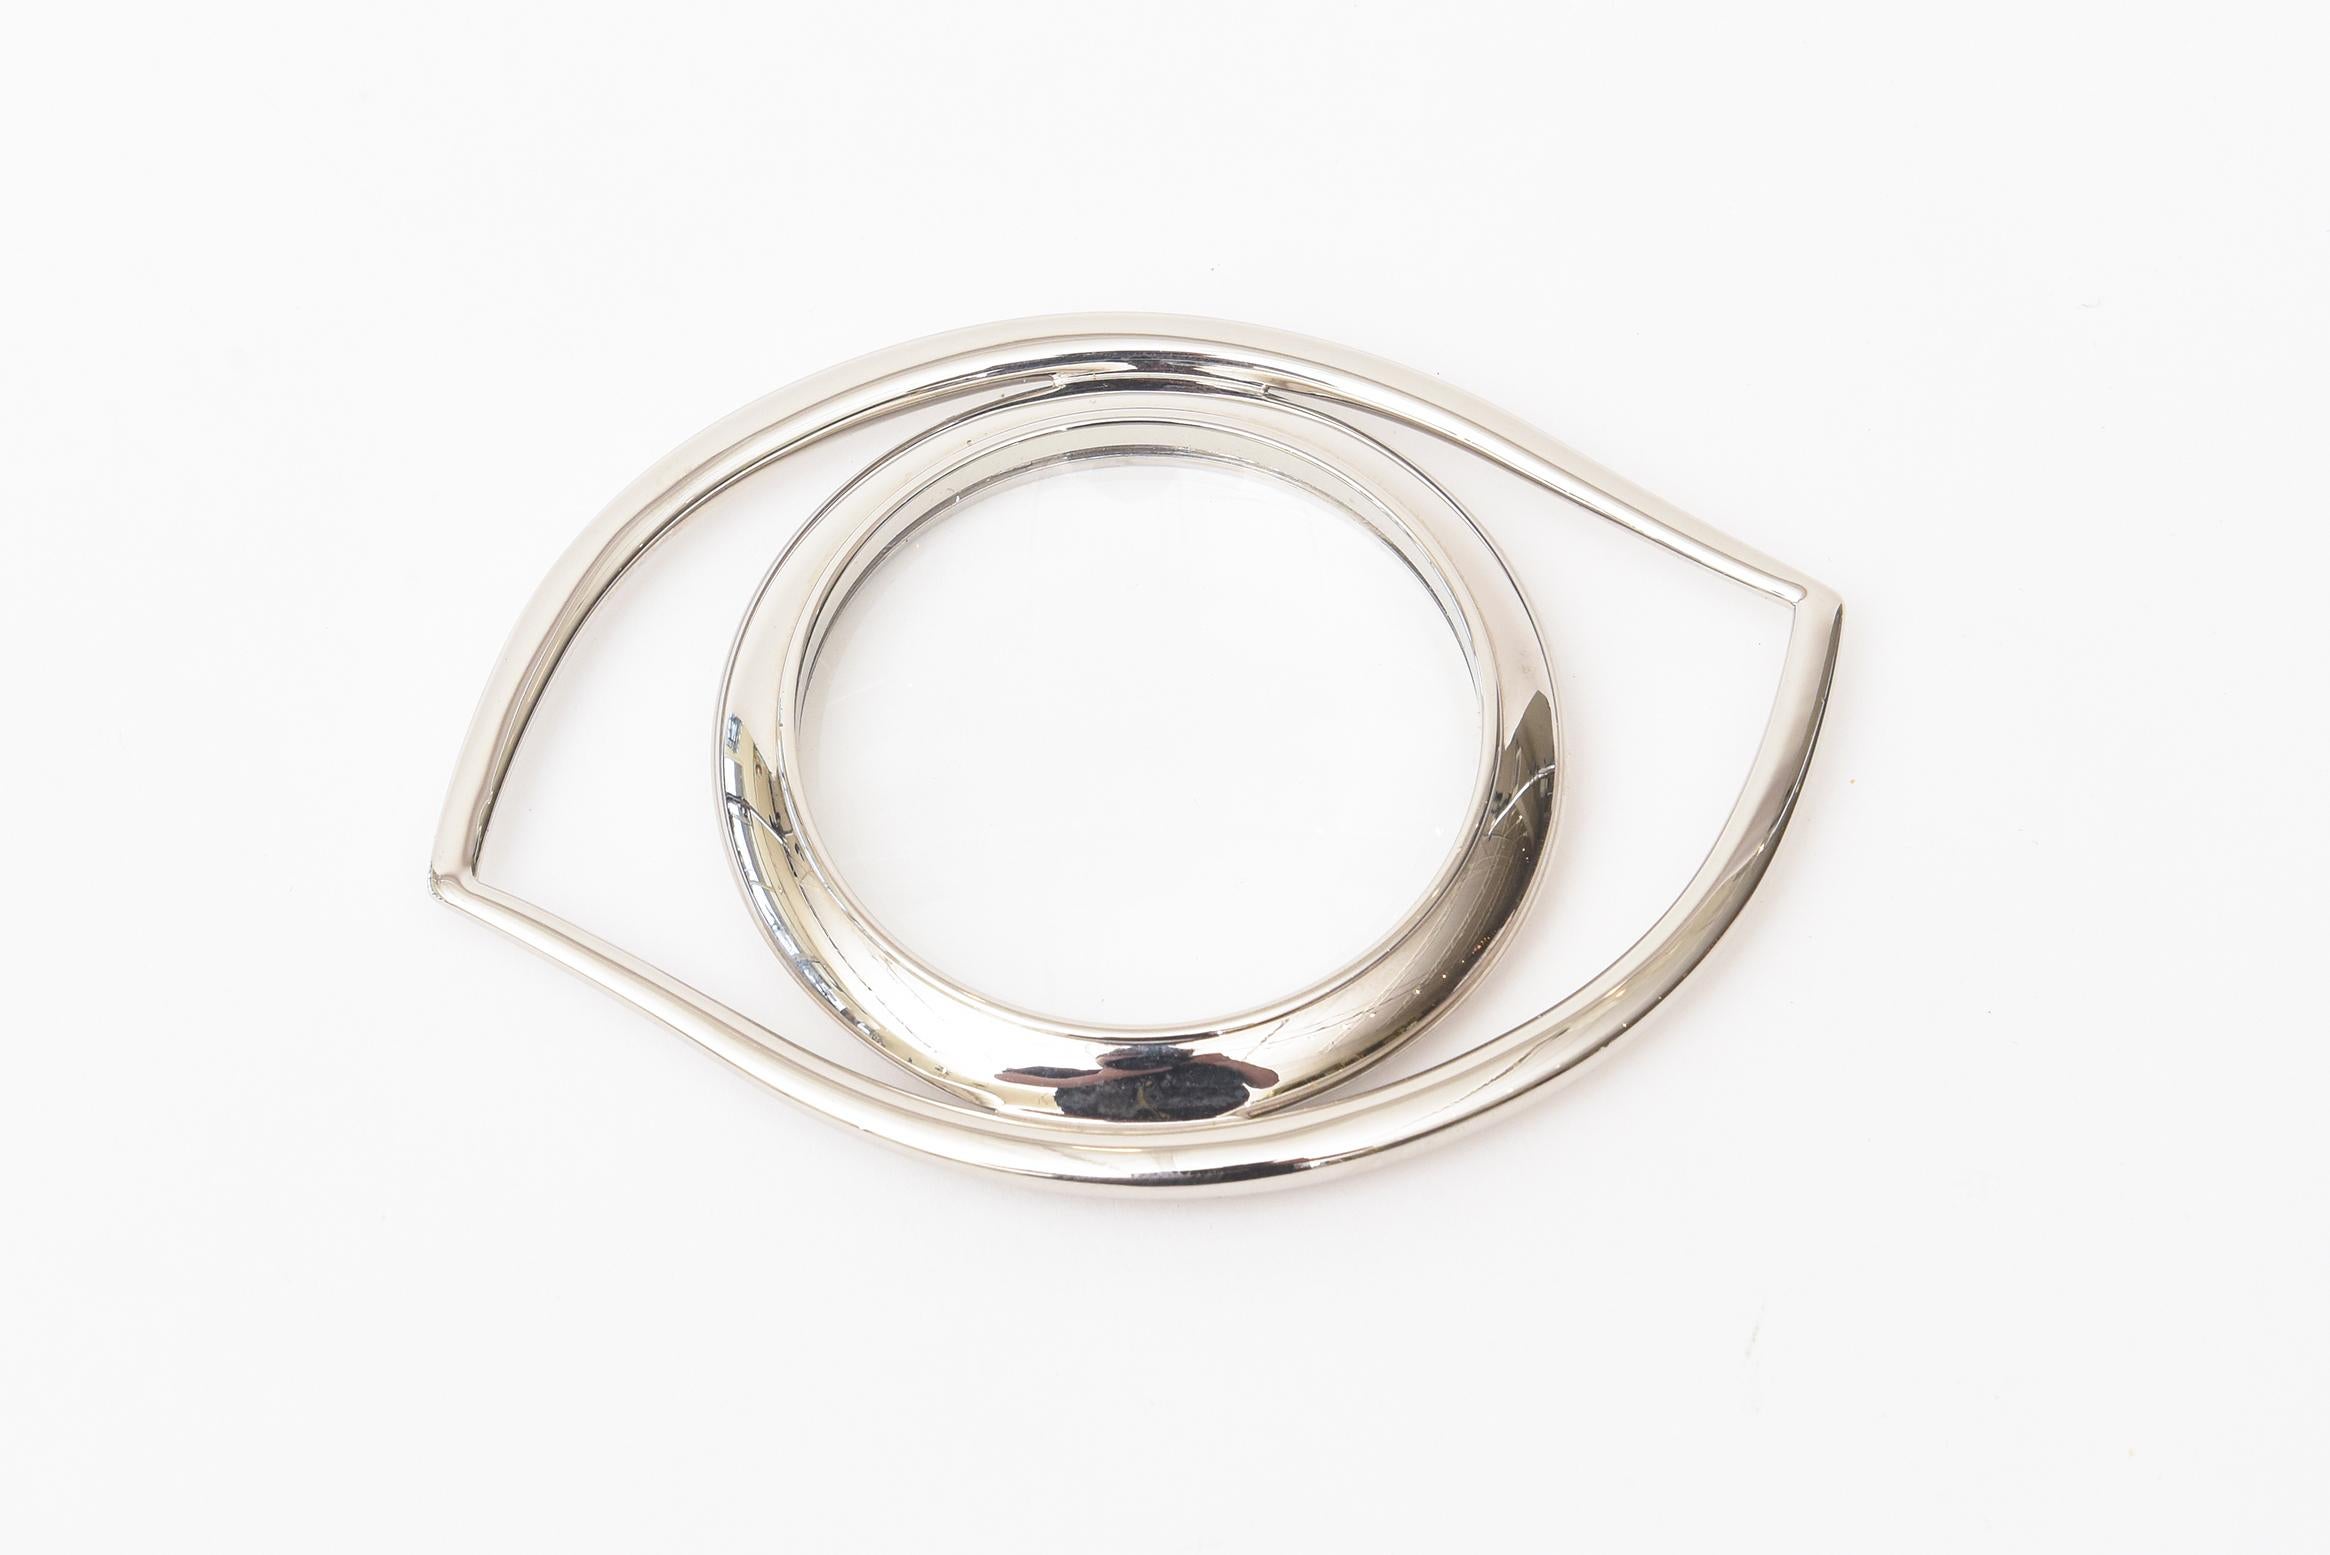 This ever so chic Hermès vintage silver plated Cleopatra eye magnifier is a great desk accessory. This is from the 1960s and was originally designed by Jean Cocteau for Hermès. It has occult and has Egyptian historical meaning. This one is marked